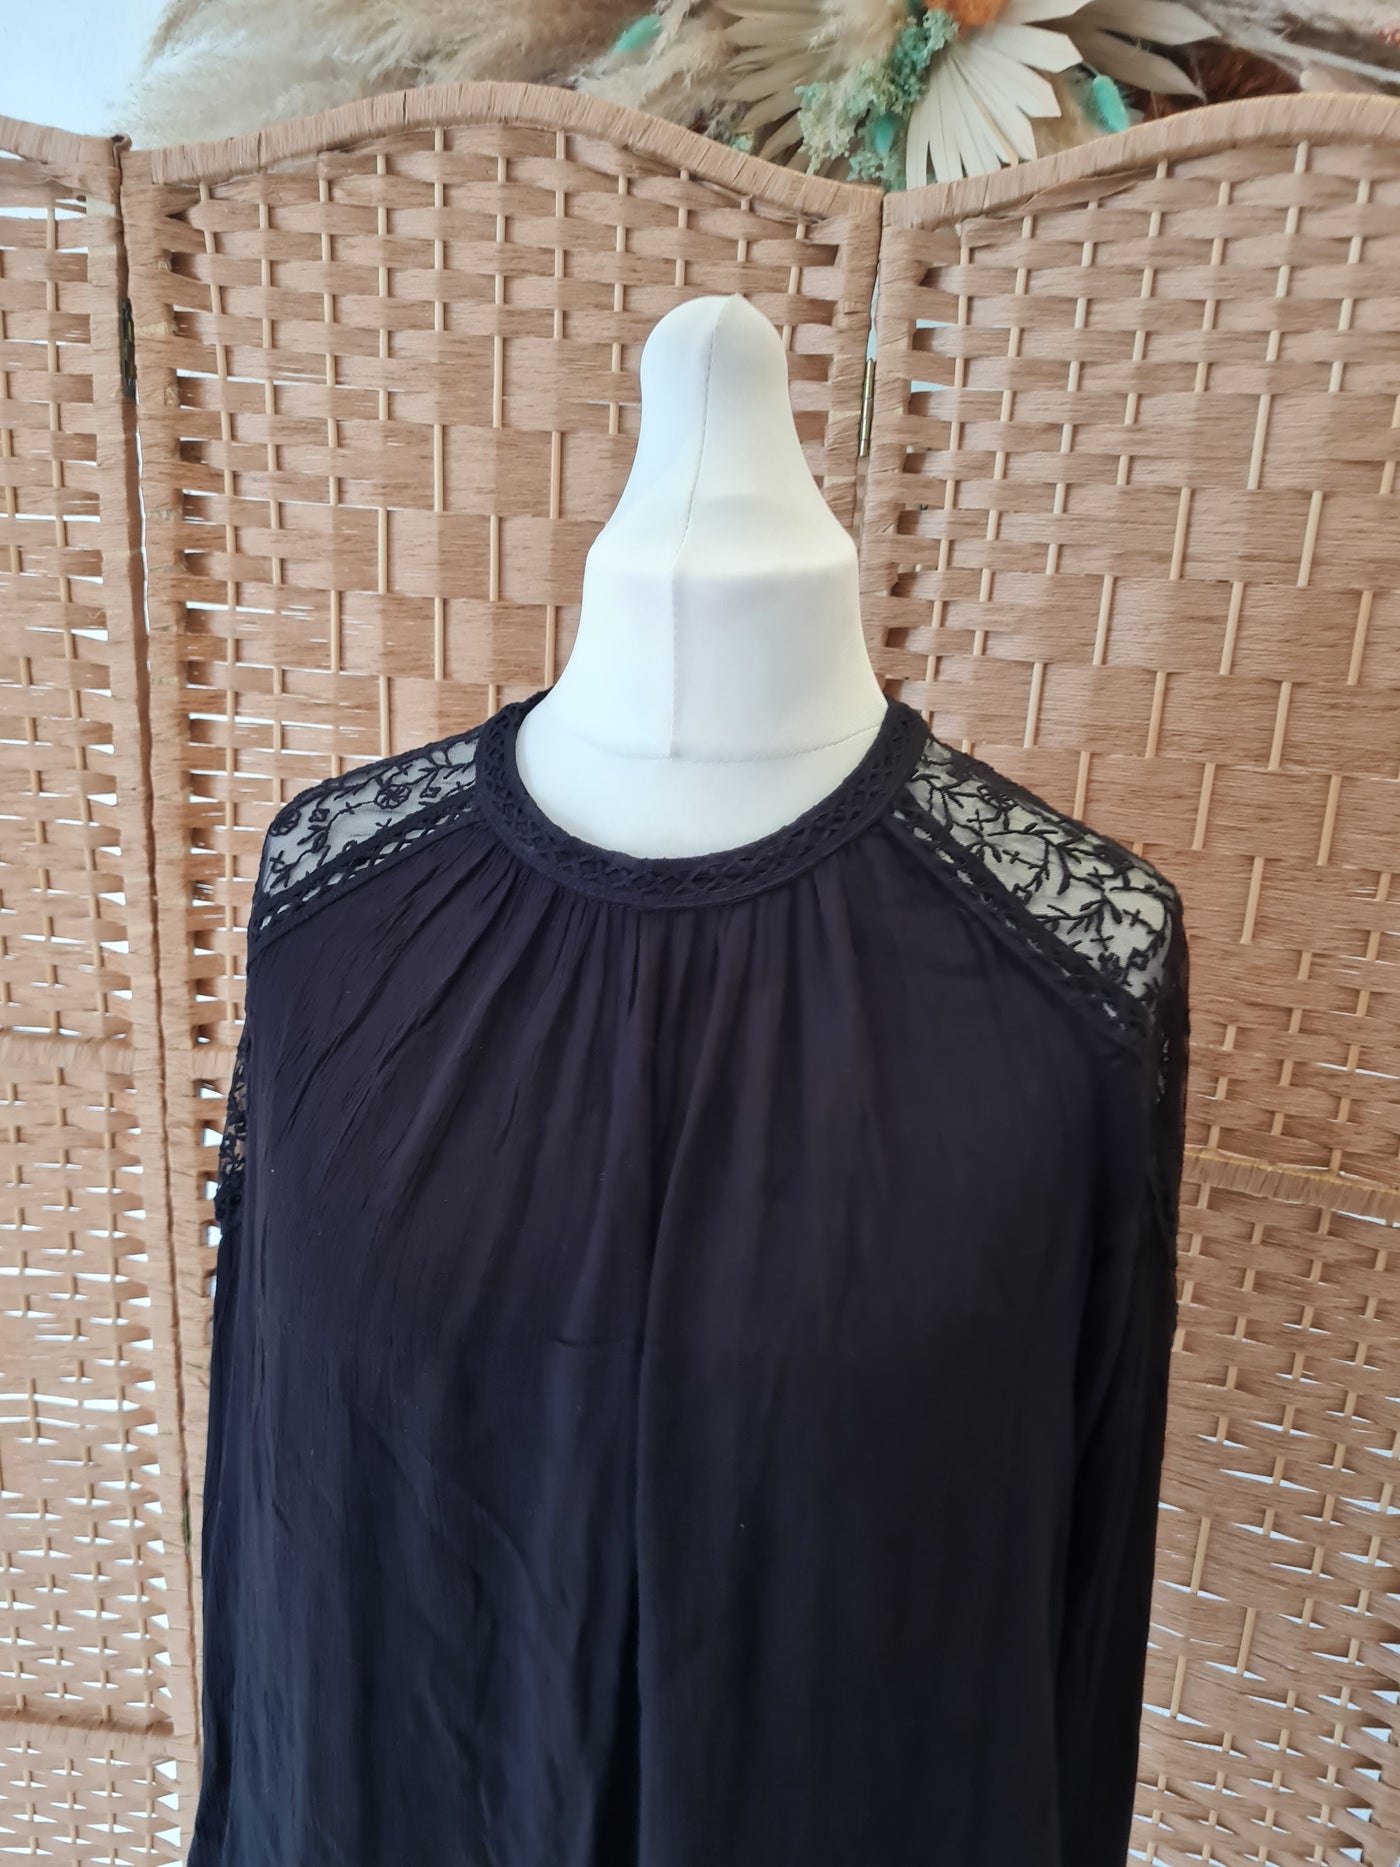 Superdry Black Lace top NWT 12